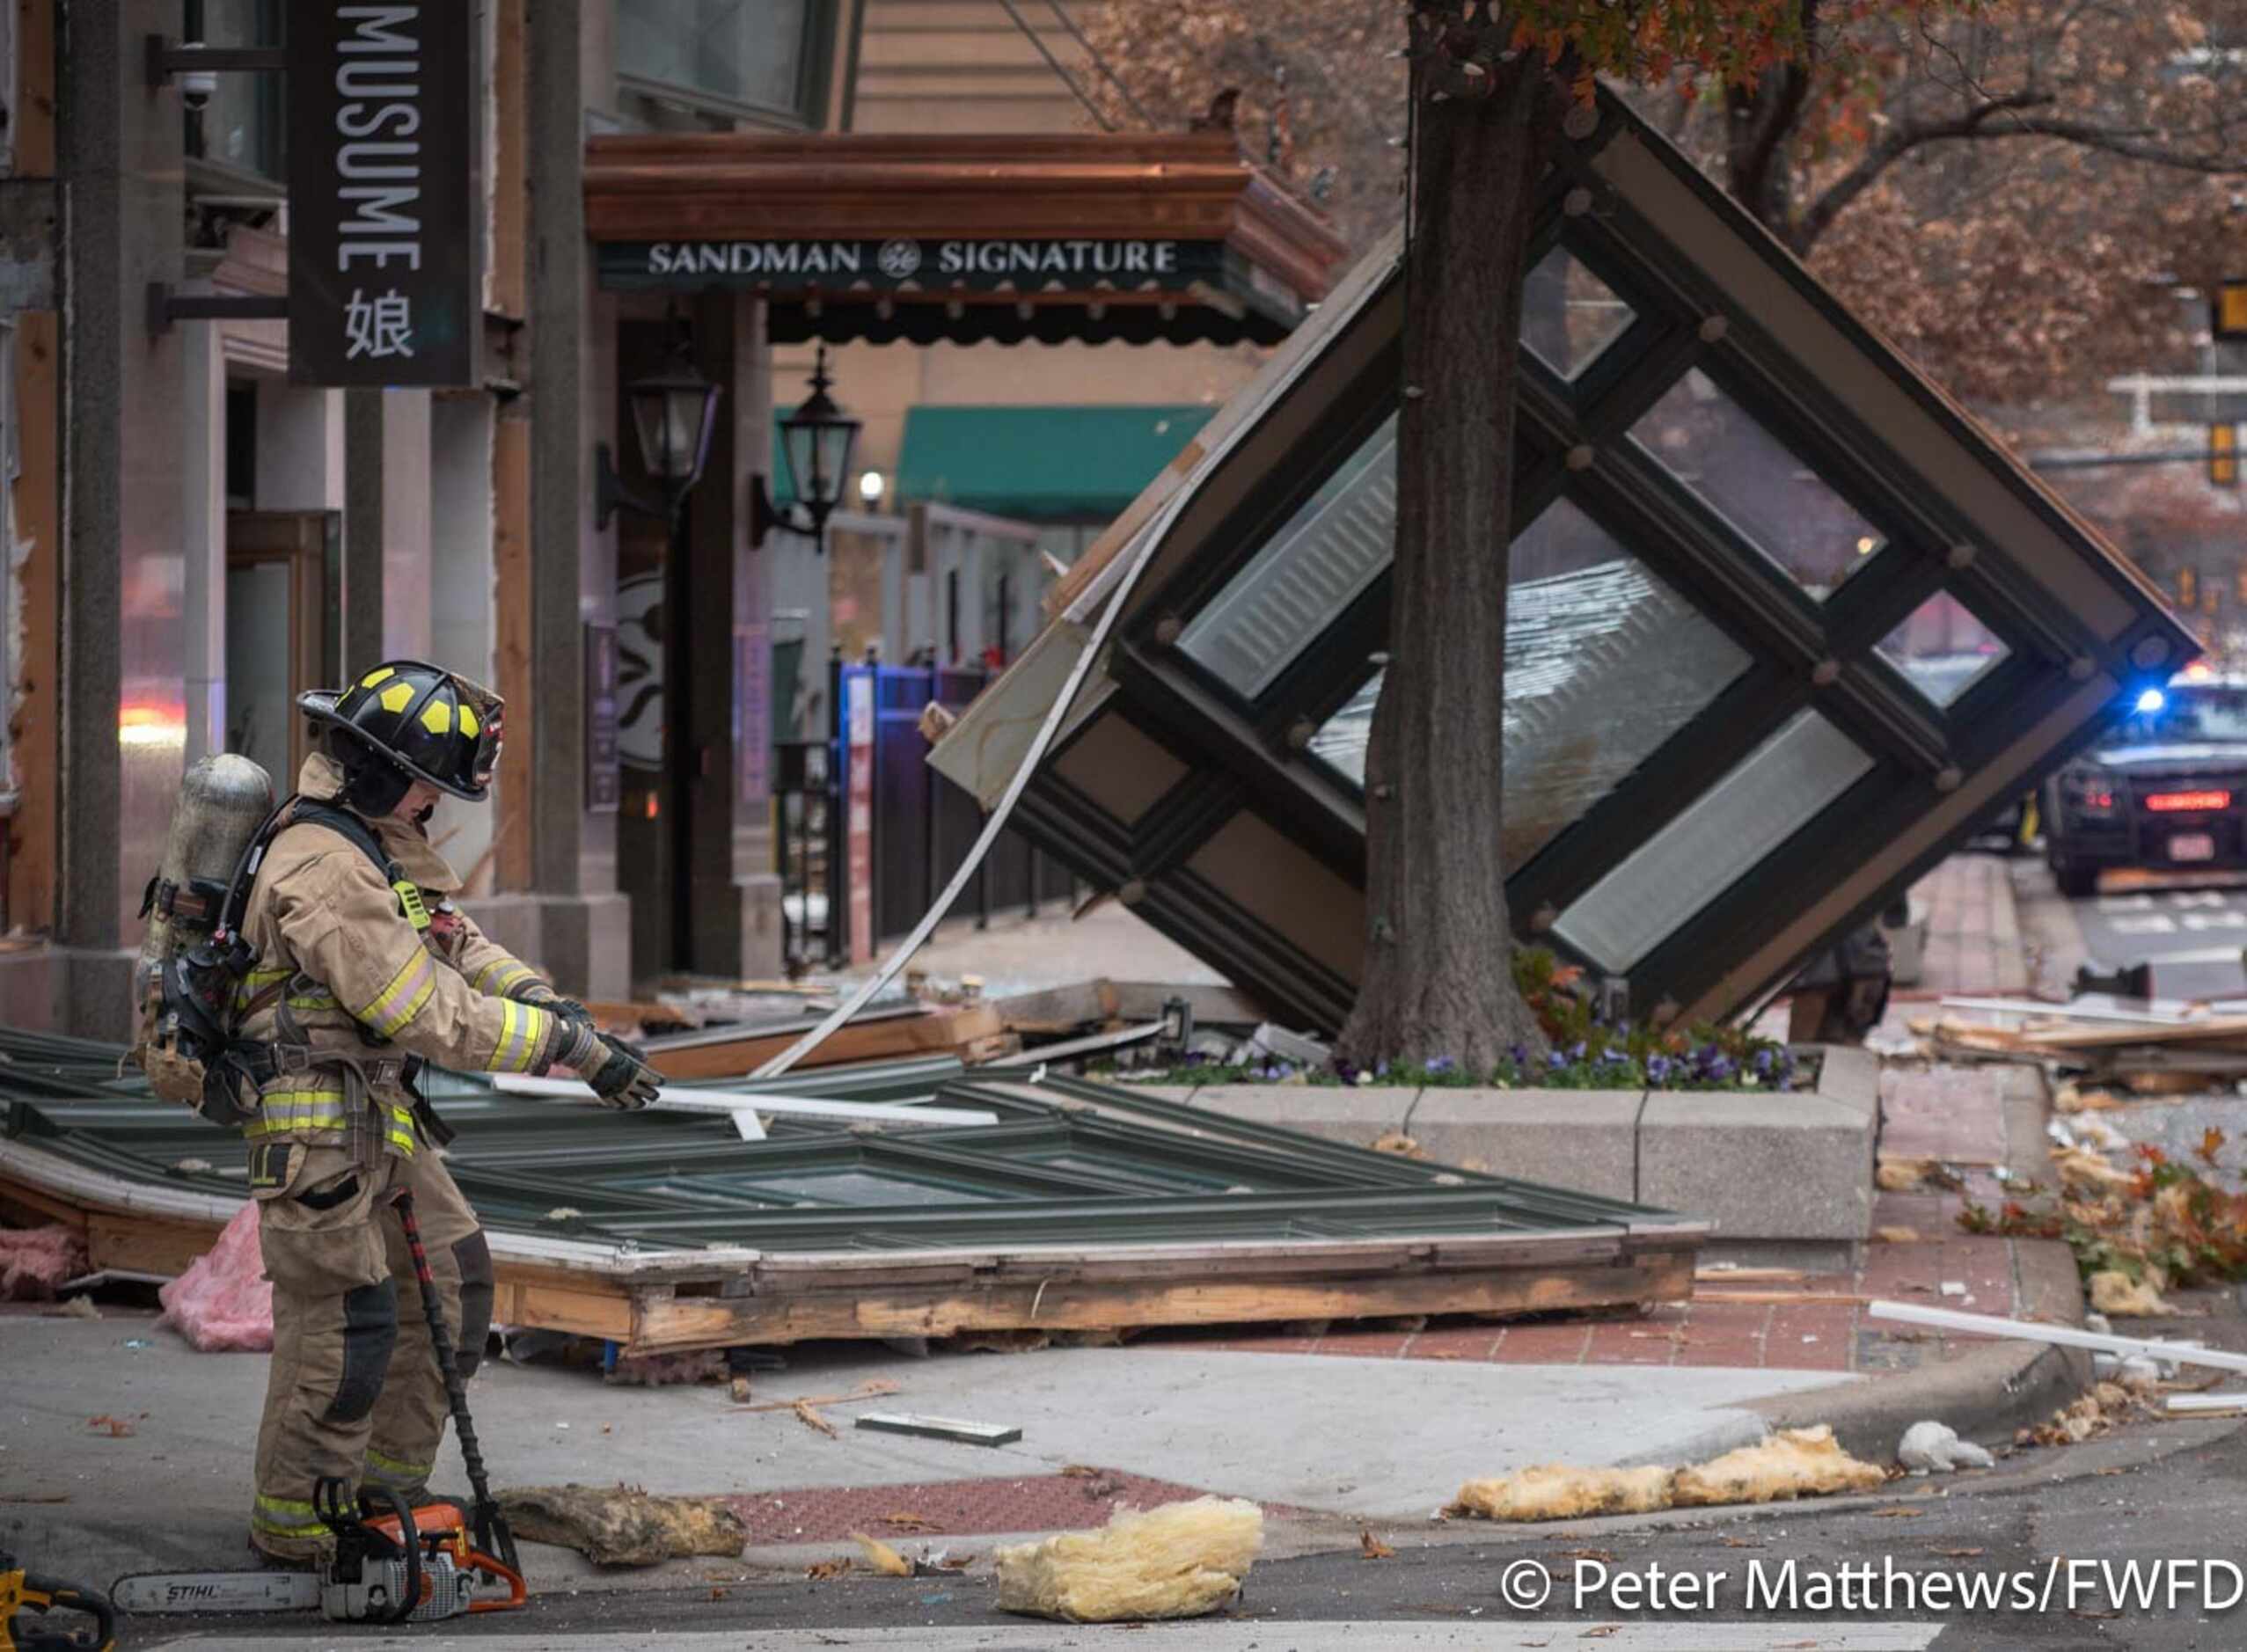 Fort Worth firefighters respond to an explosion at the Sandman Signature Hotel building in...